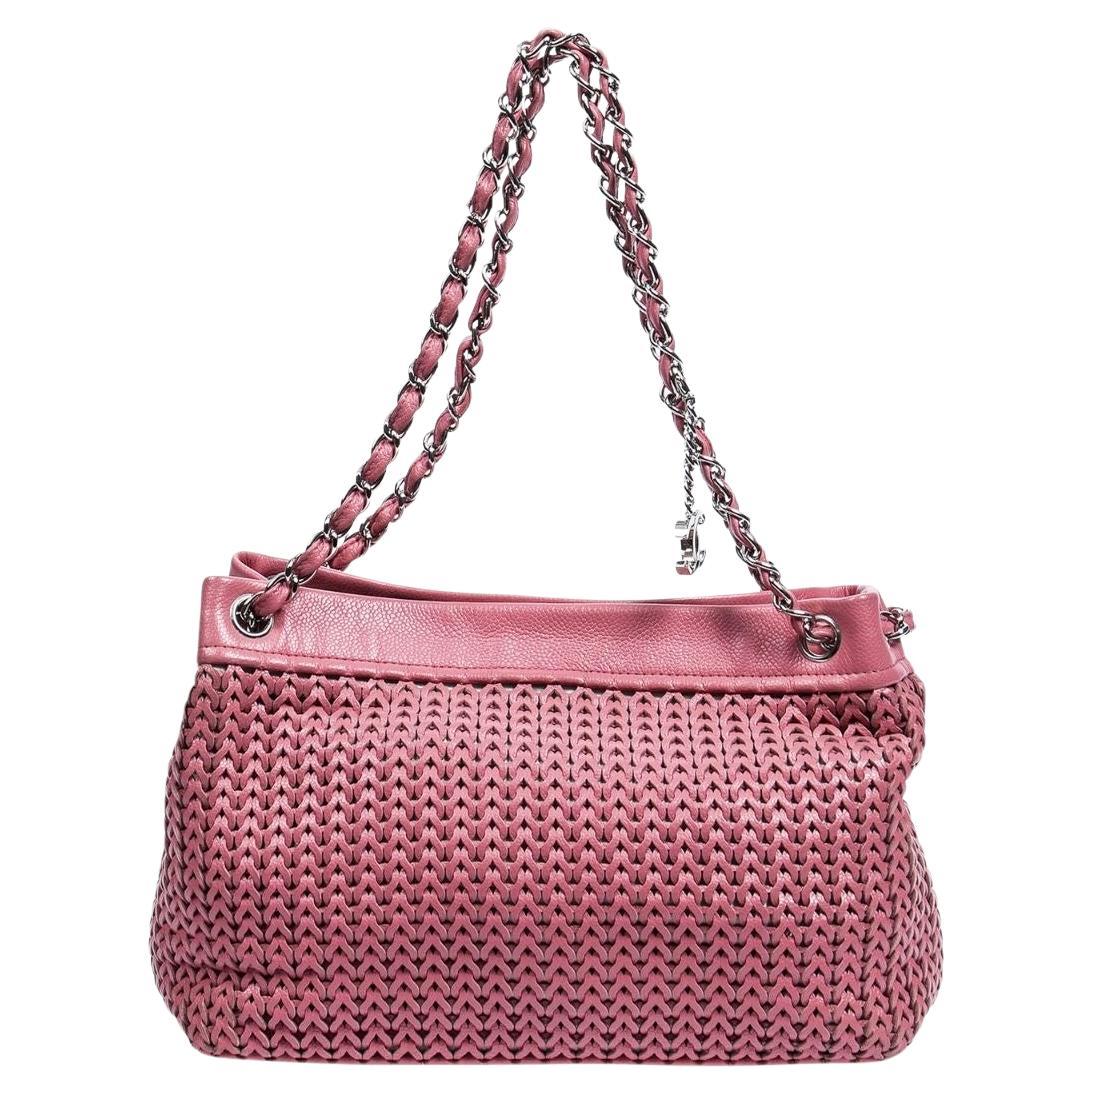 Chanel 2005 Light Pink CC Woven Charm Tote